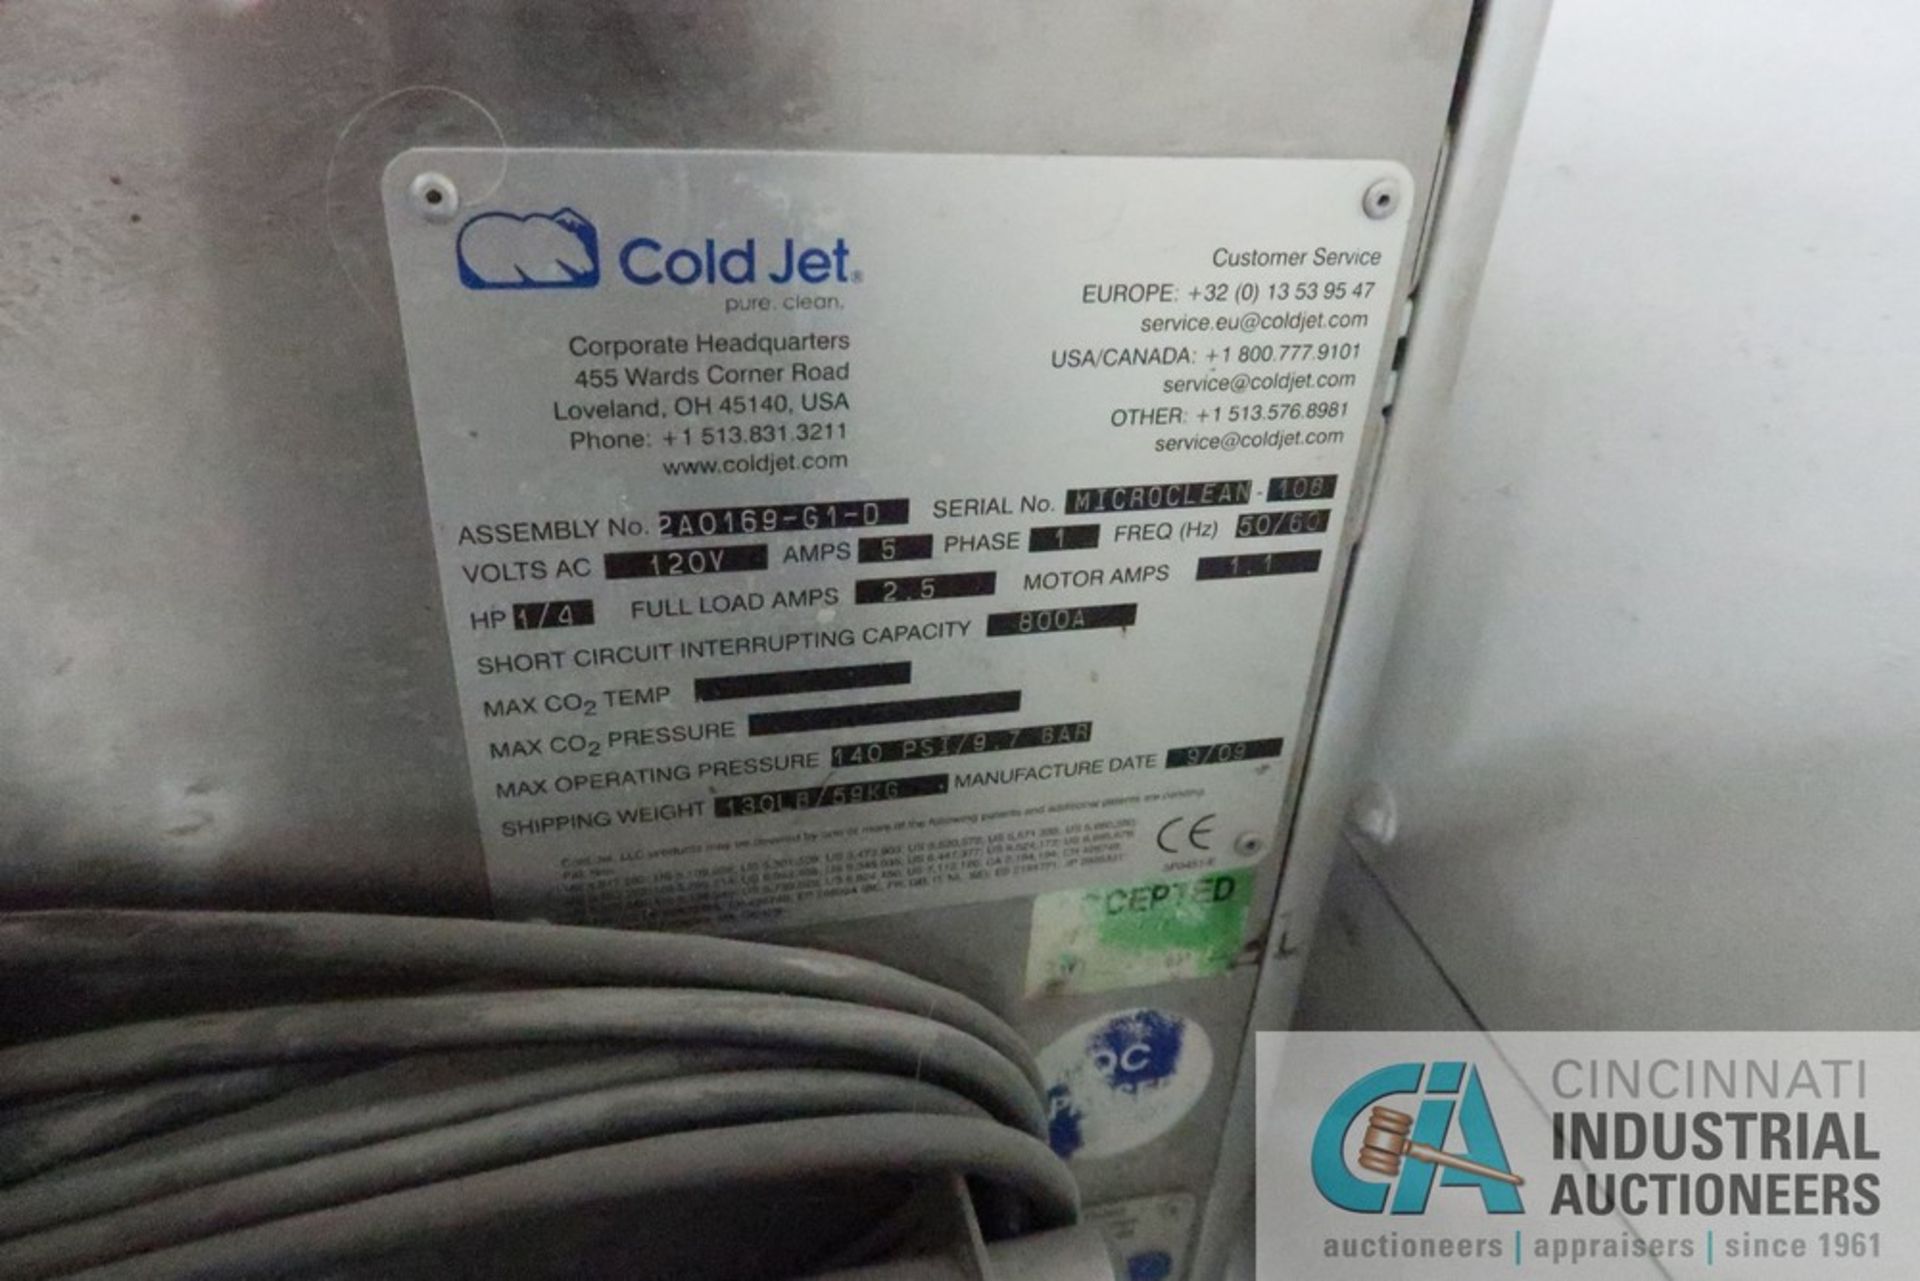 COLD JET MICRO-CLEAN ICE BLAST UNIT; S/N 108, ASSEMBLY NO. 2A0169-G1-D, 18,055 HOURS (2009) - Image 6 of 6